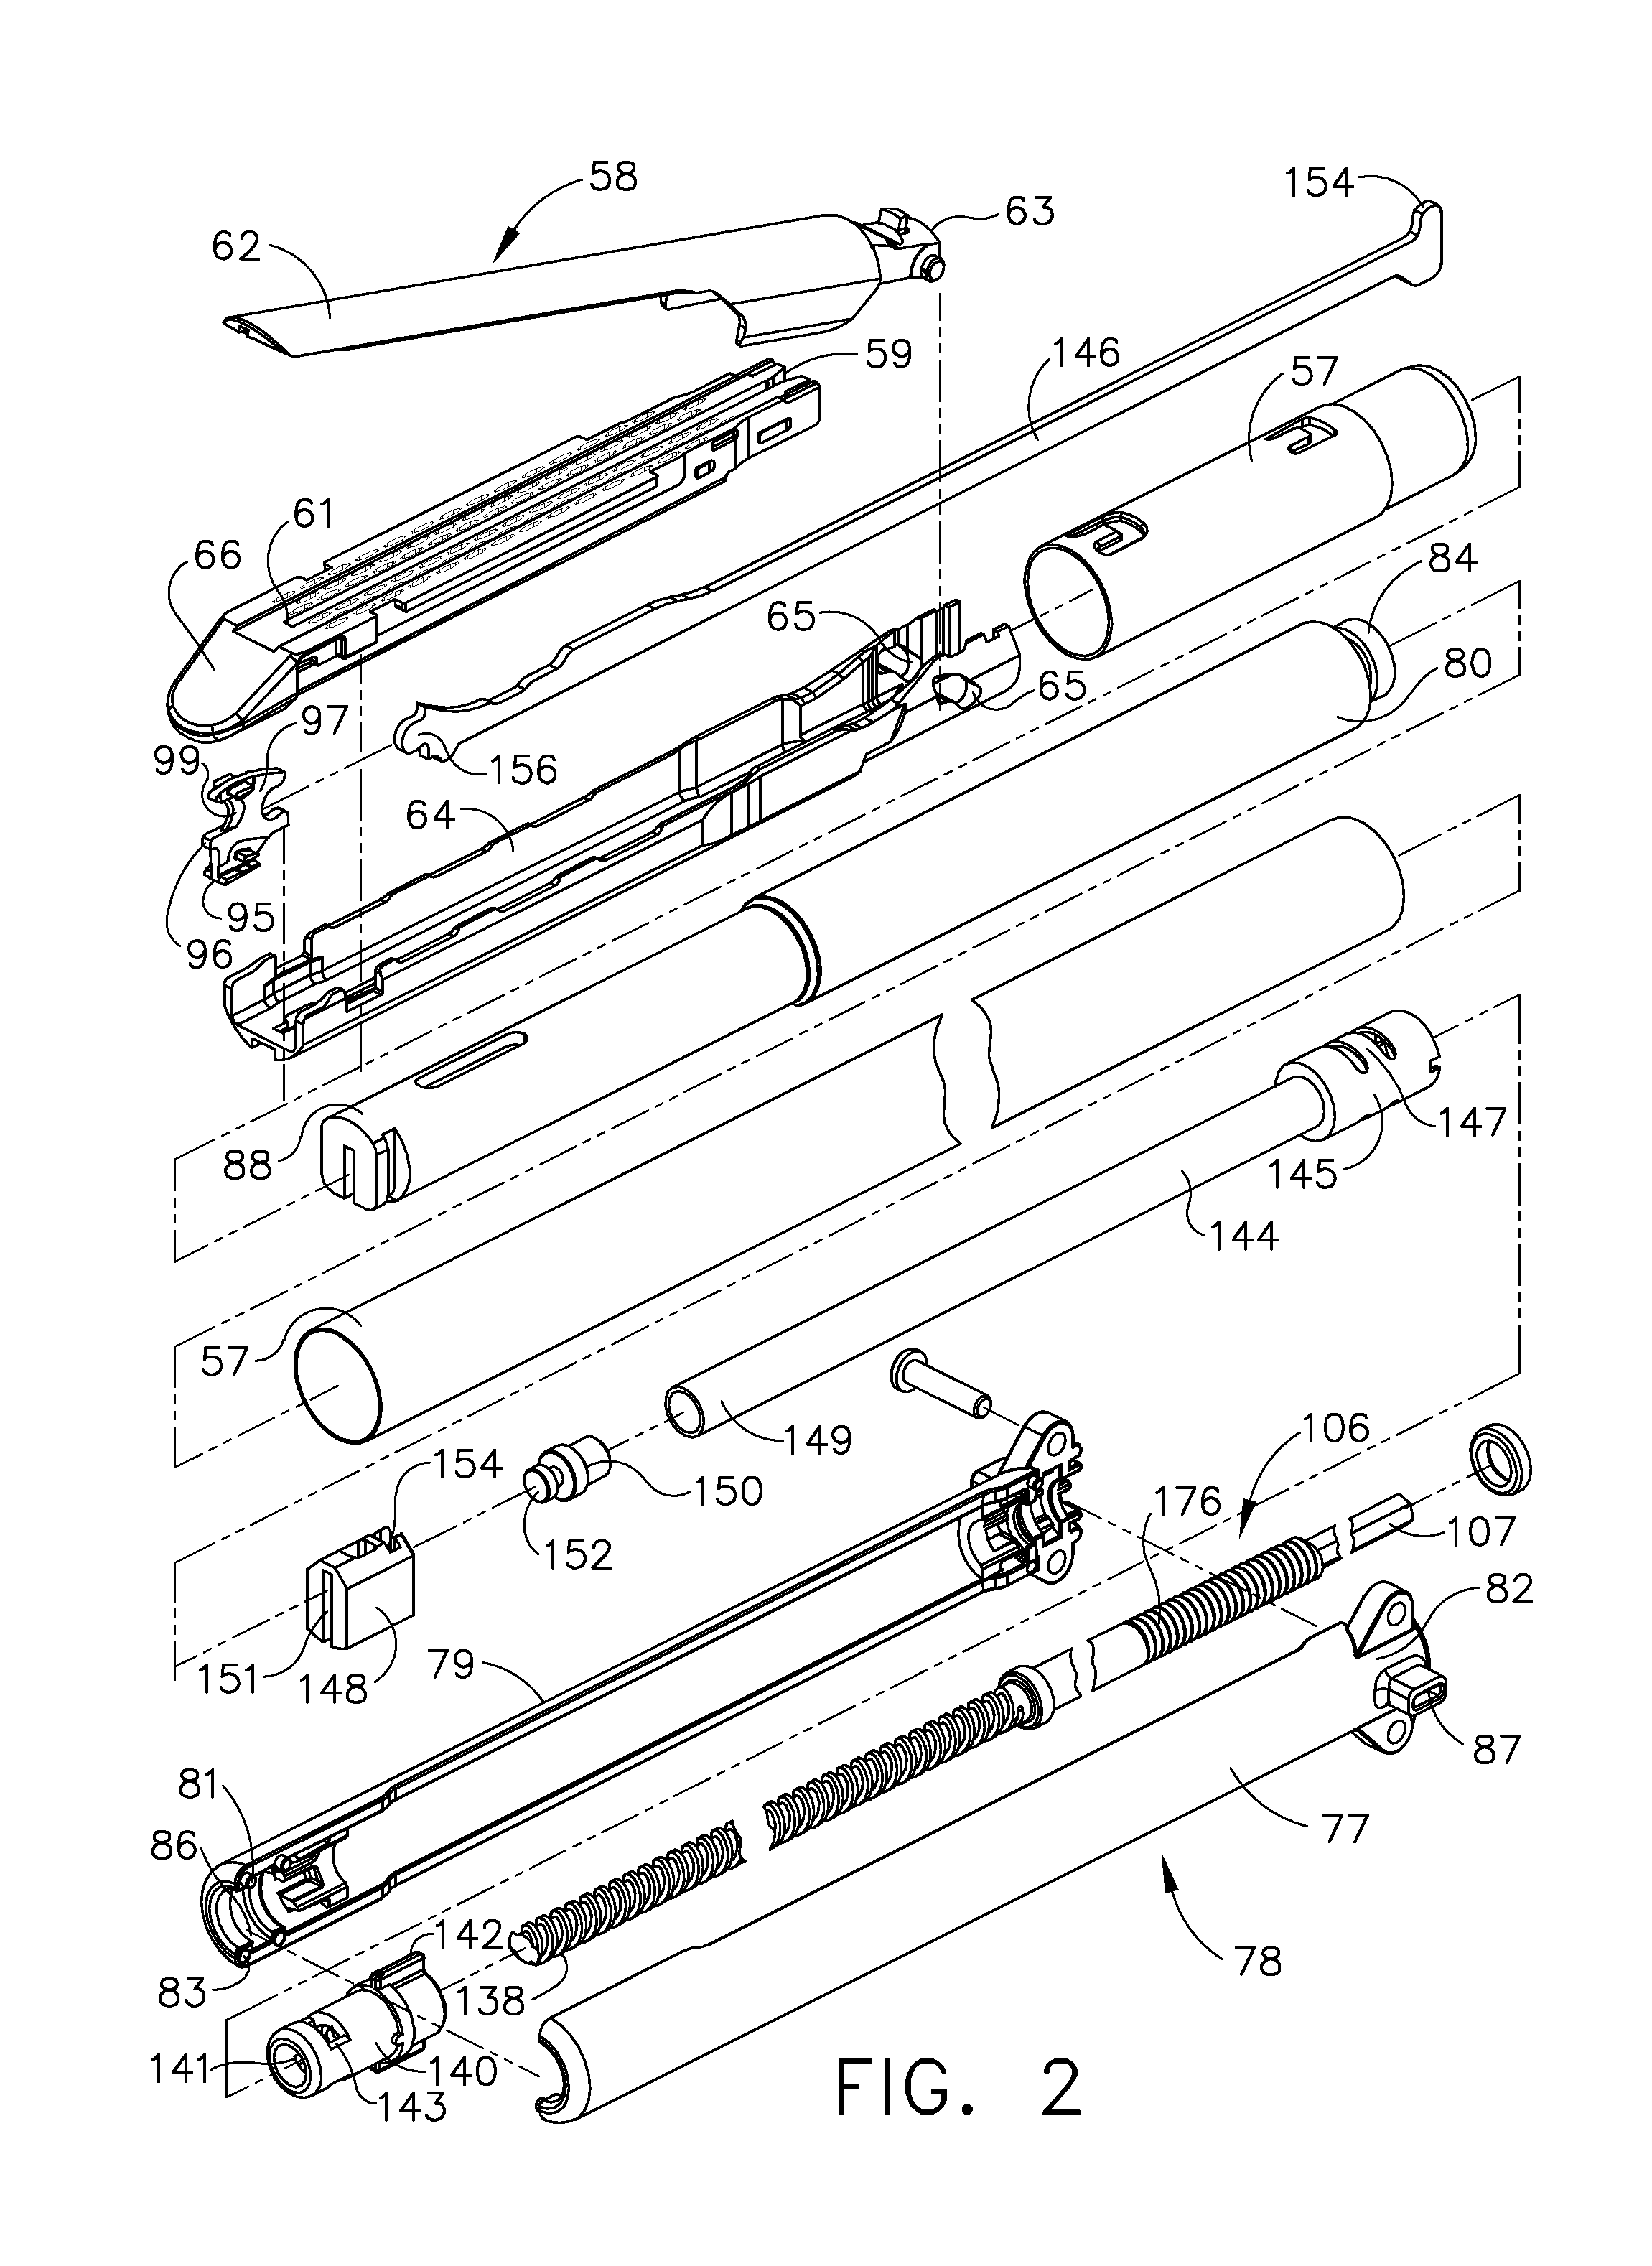 Surgical Instrument Having A Multiple Rate Directional Switching Mechanism